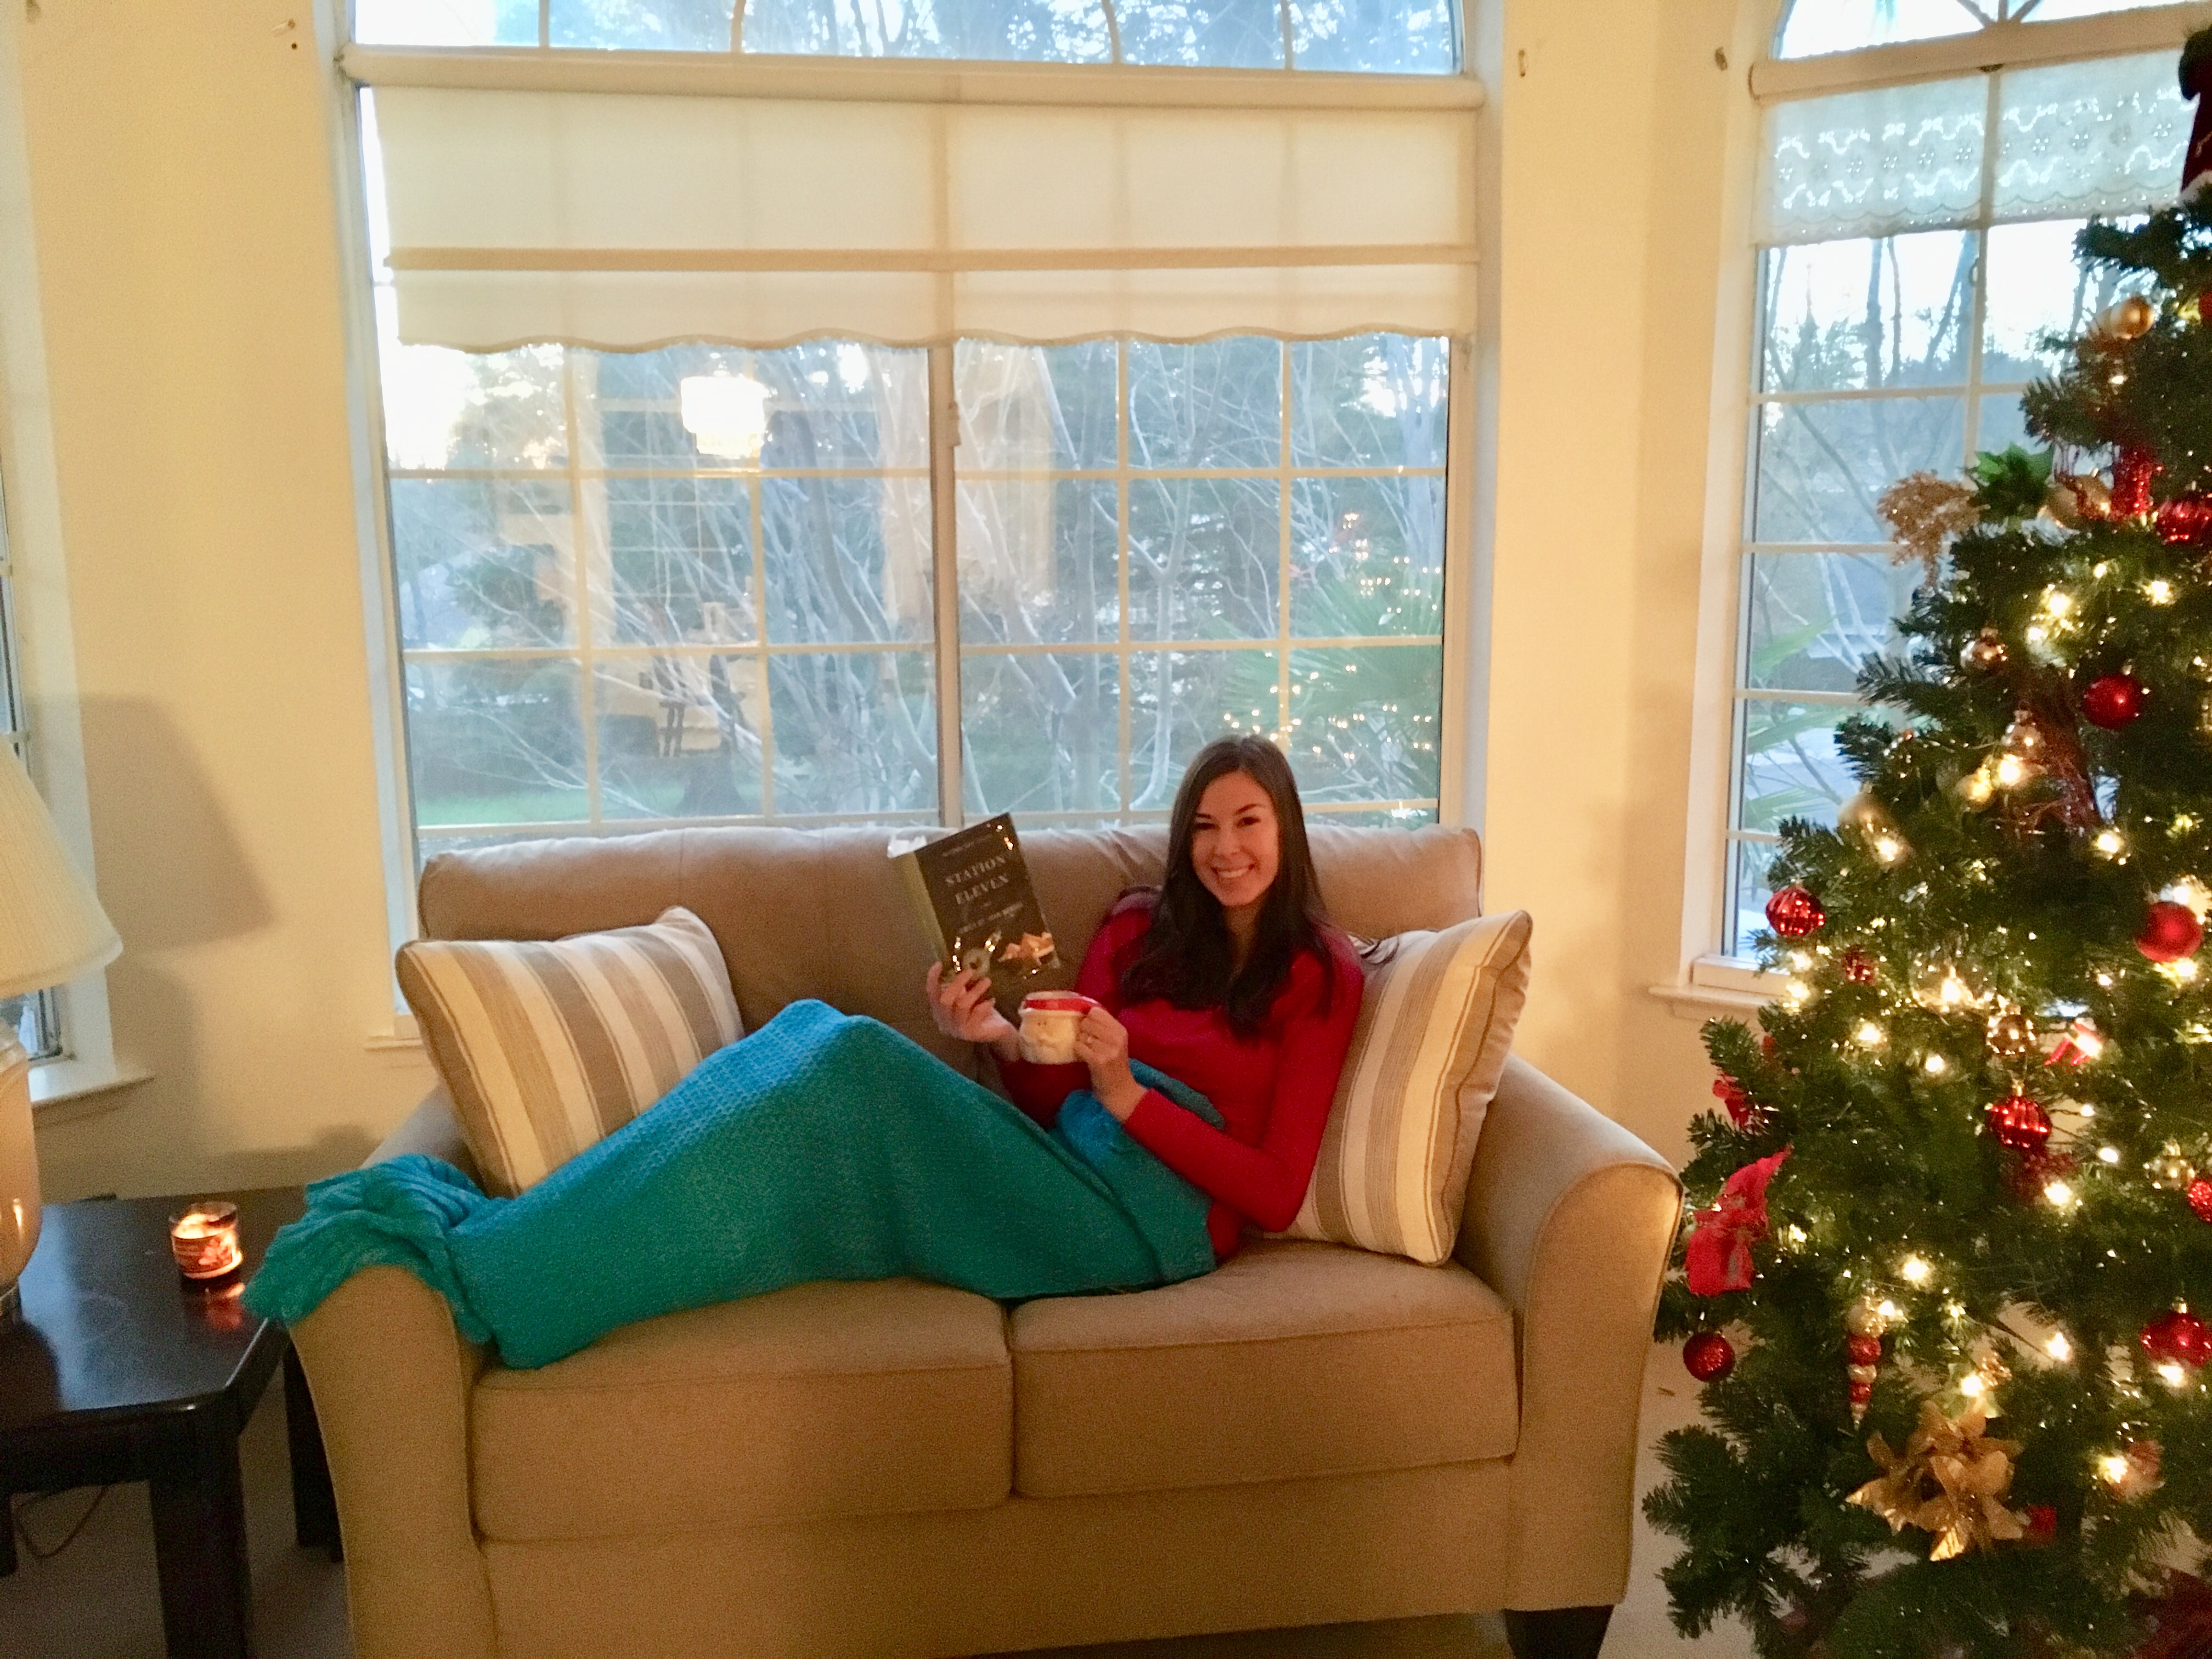 Jenna sitting on couch with mug and book in a teal blanket